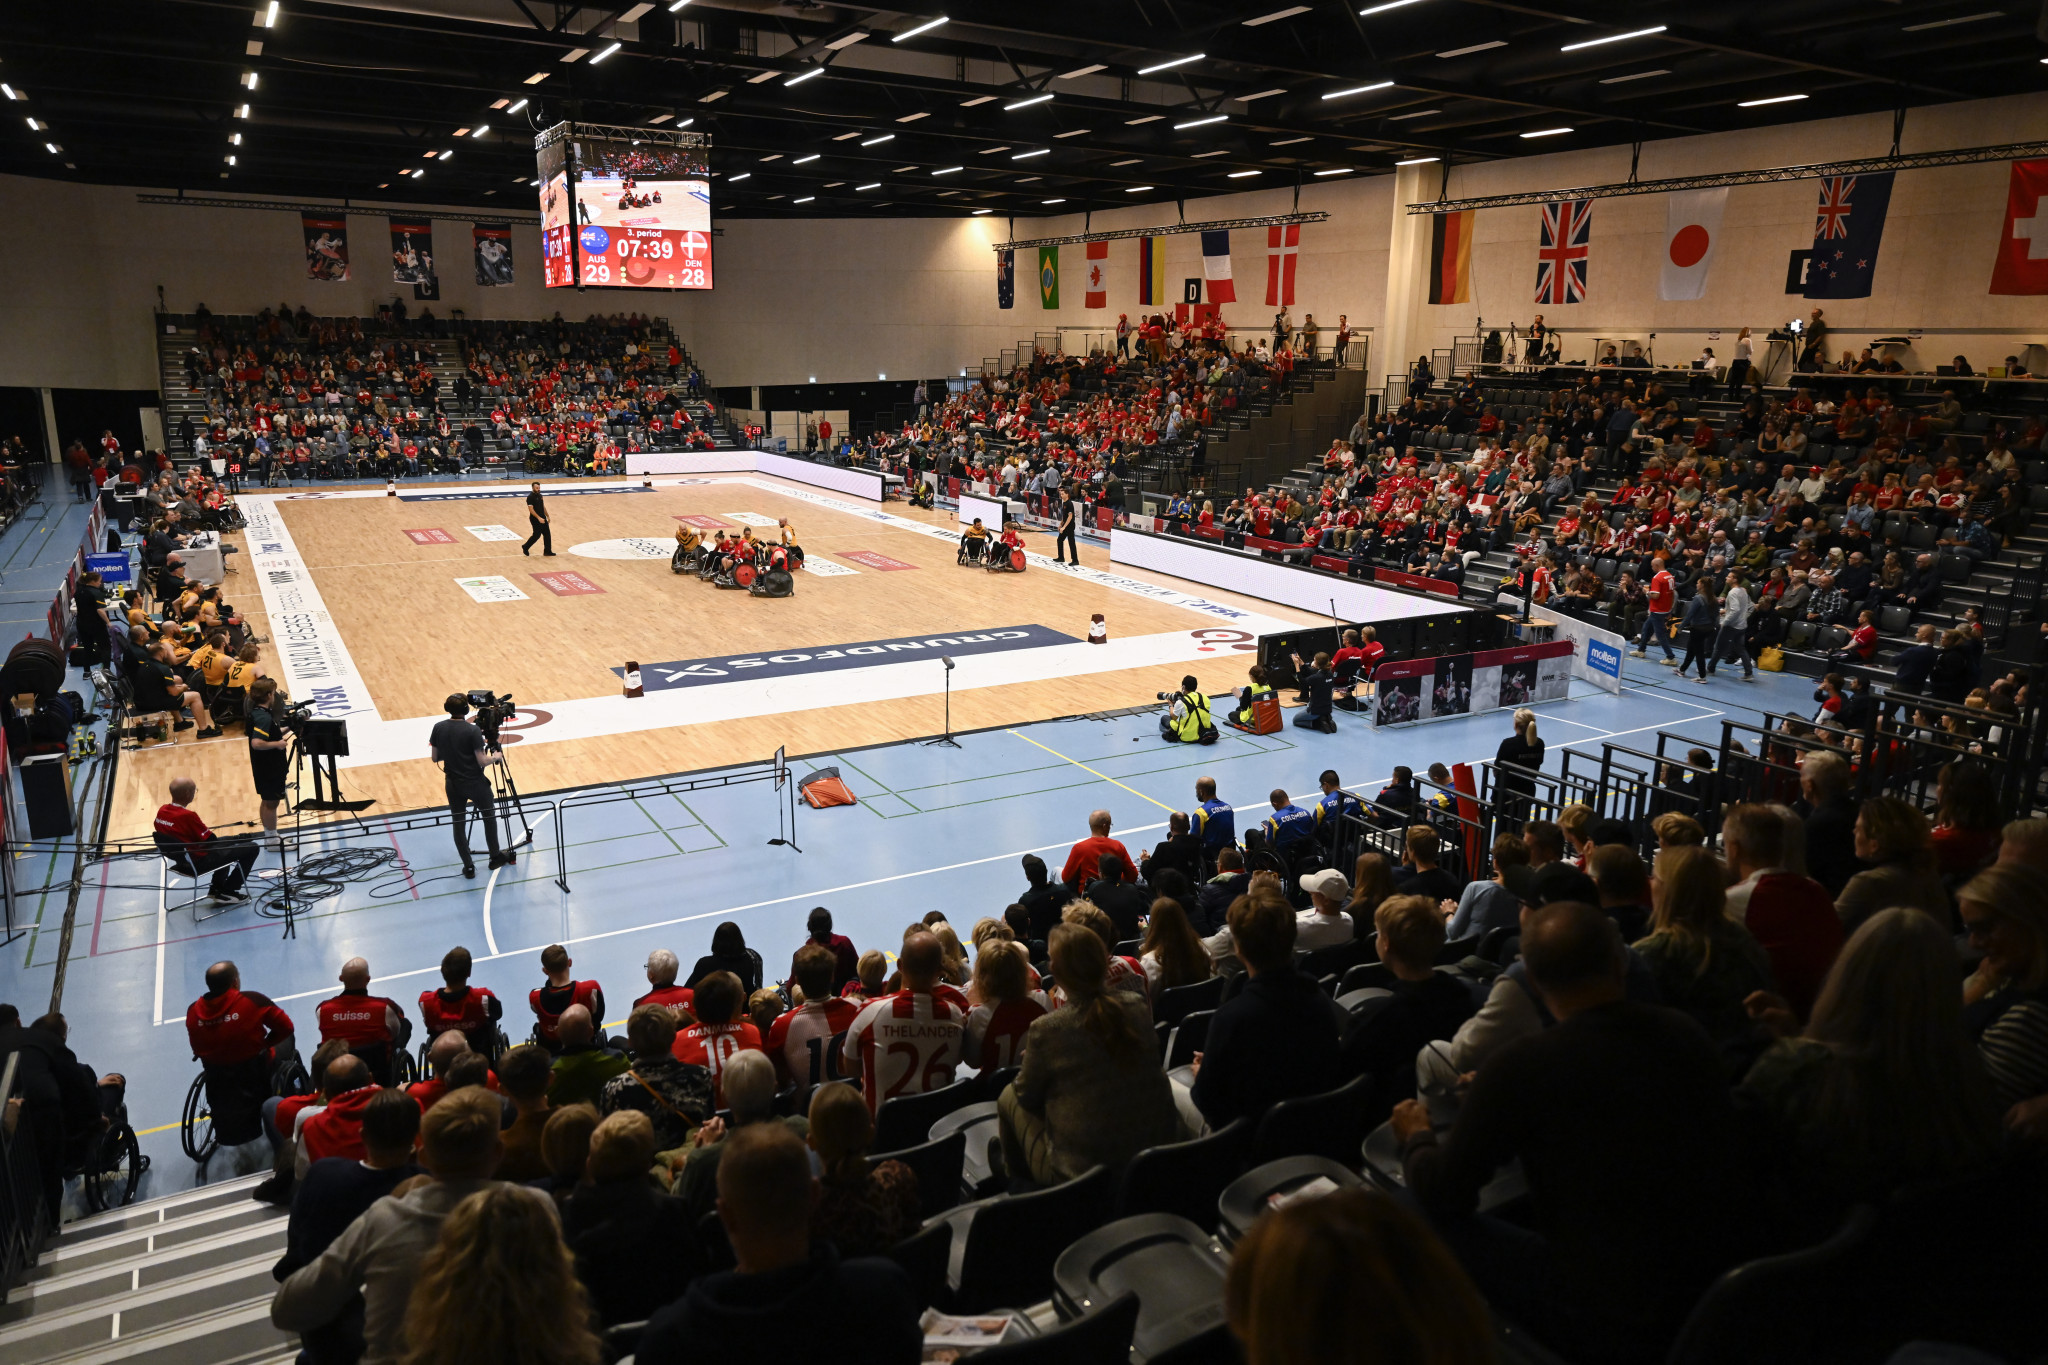 Home supporters came out in full force at the DGI Huset Sports Complex to support the Danes ©Lars Møller/Parasport Denmark